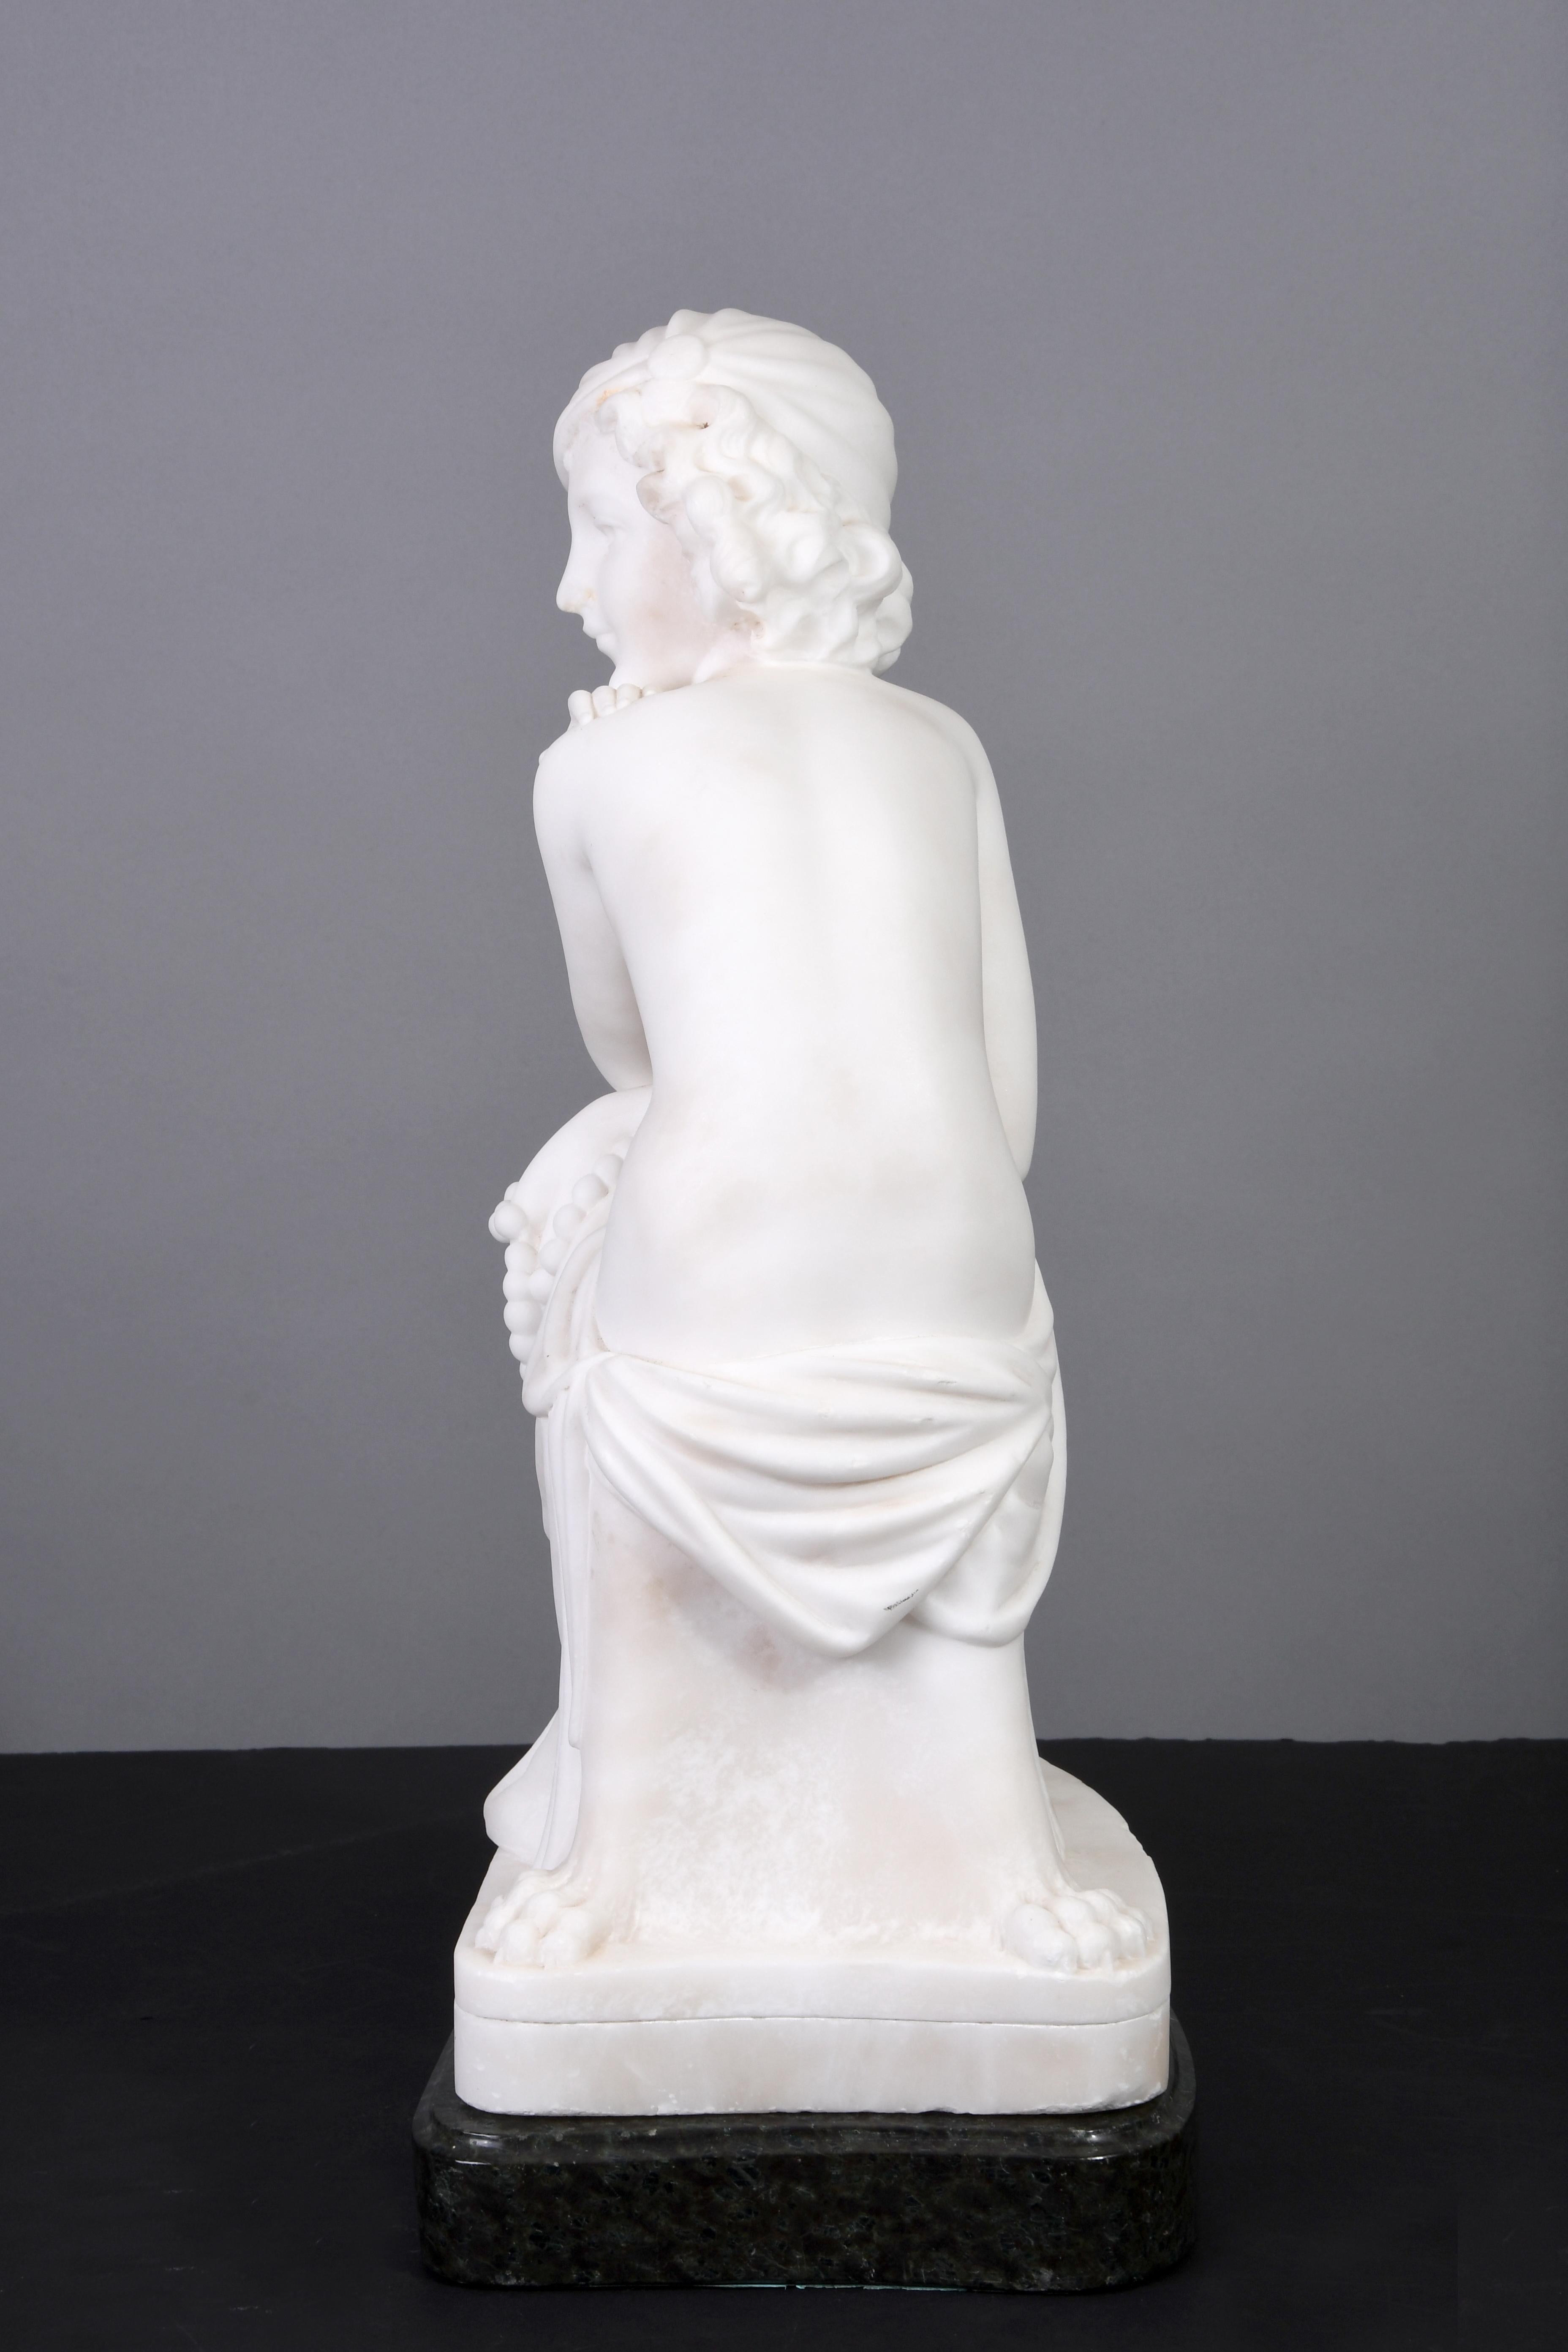 An Art Deco figure of a young girl semi nude in the upper torso carved in white alabaster. She is seated on an Empire chair as an innocent thinker pose holding a pearl necklace in her hand. The sculptor pay attention to specific details regarding